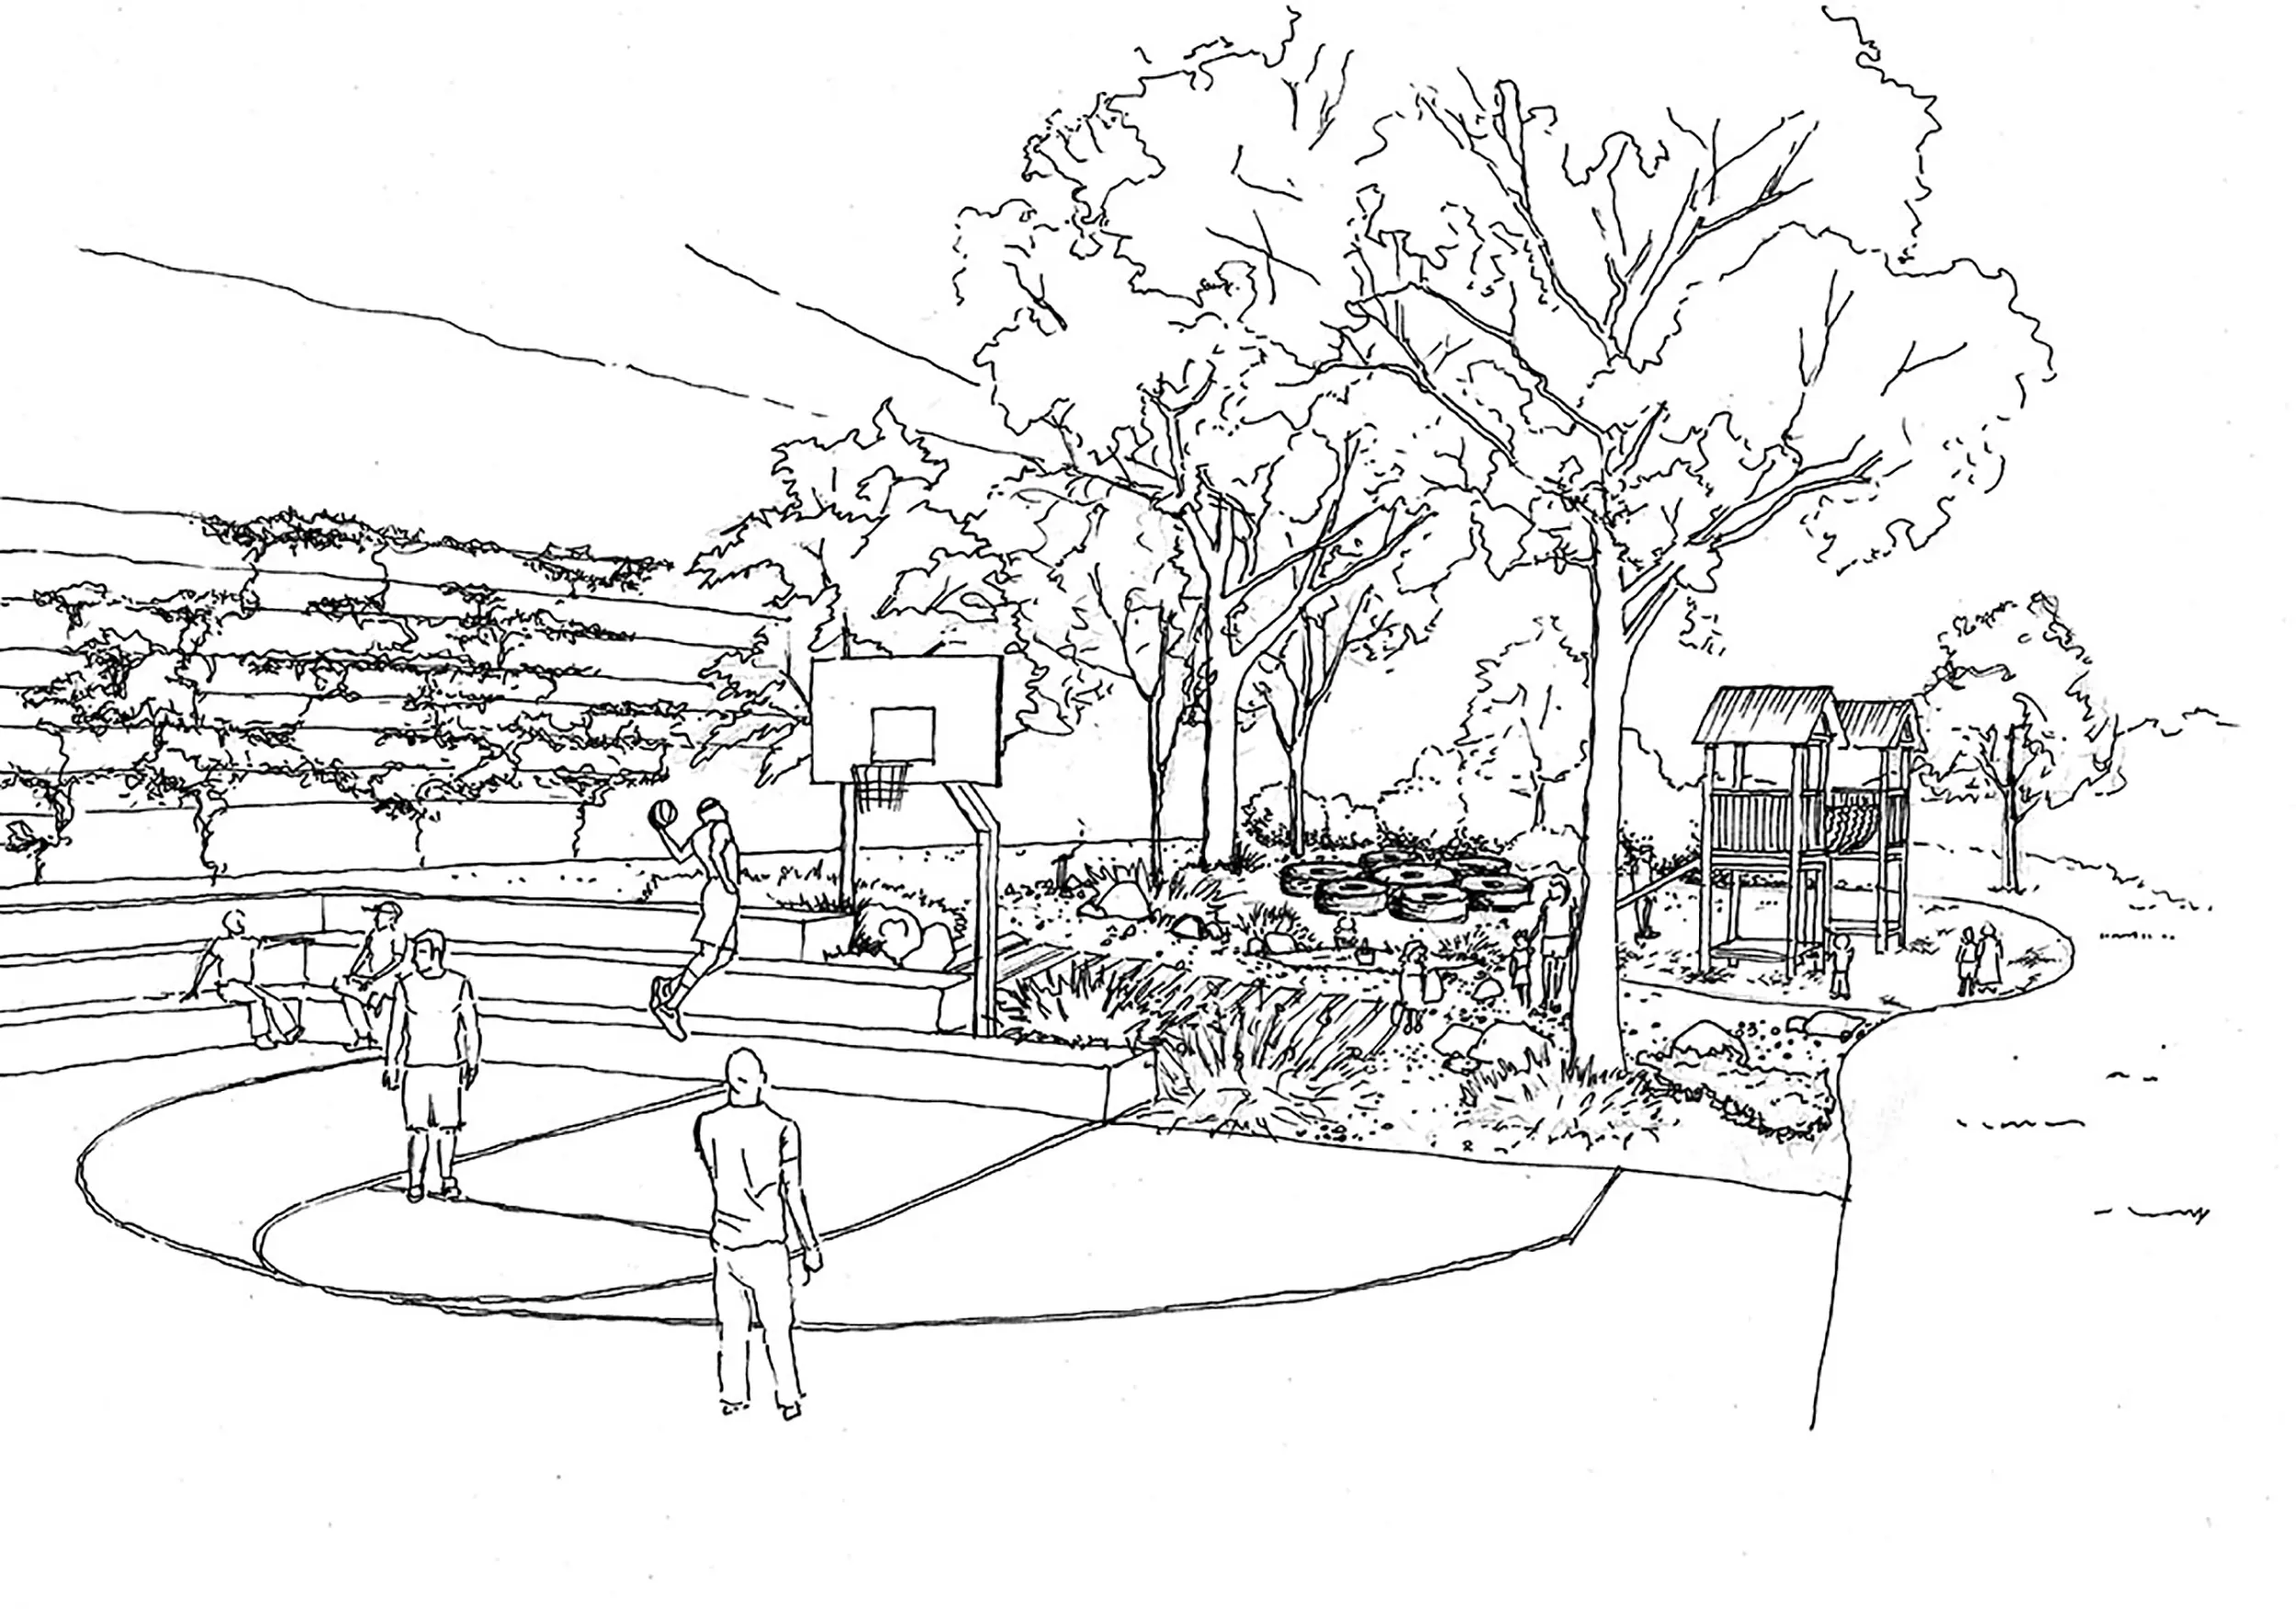 Black and white sketch of PCYC Nerang recreational area